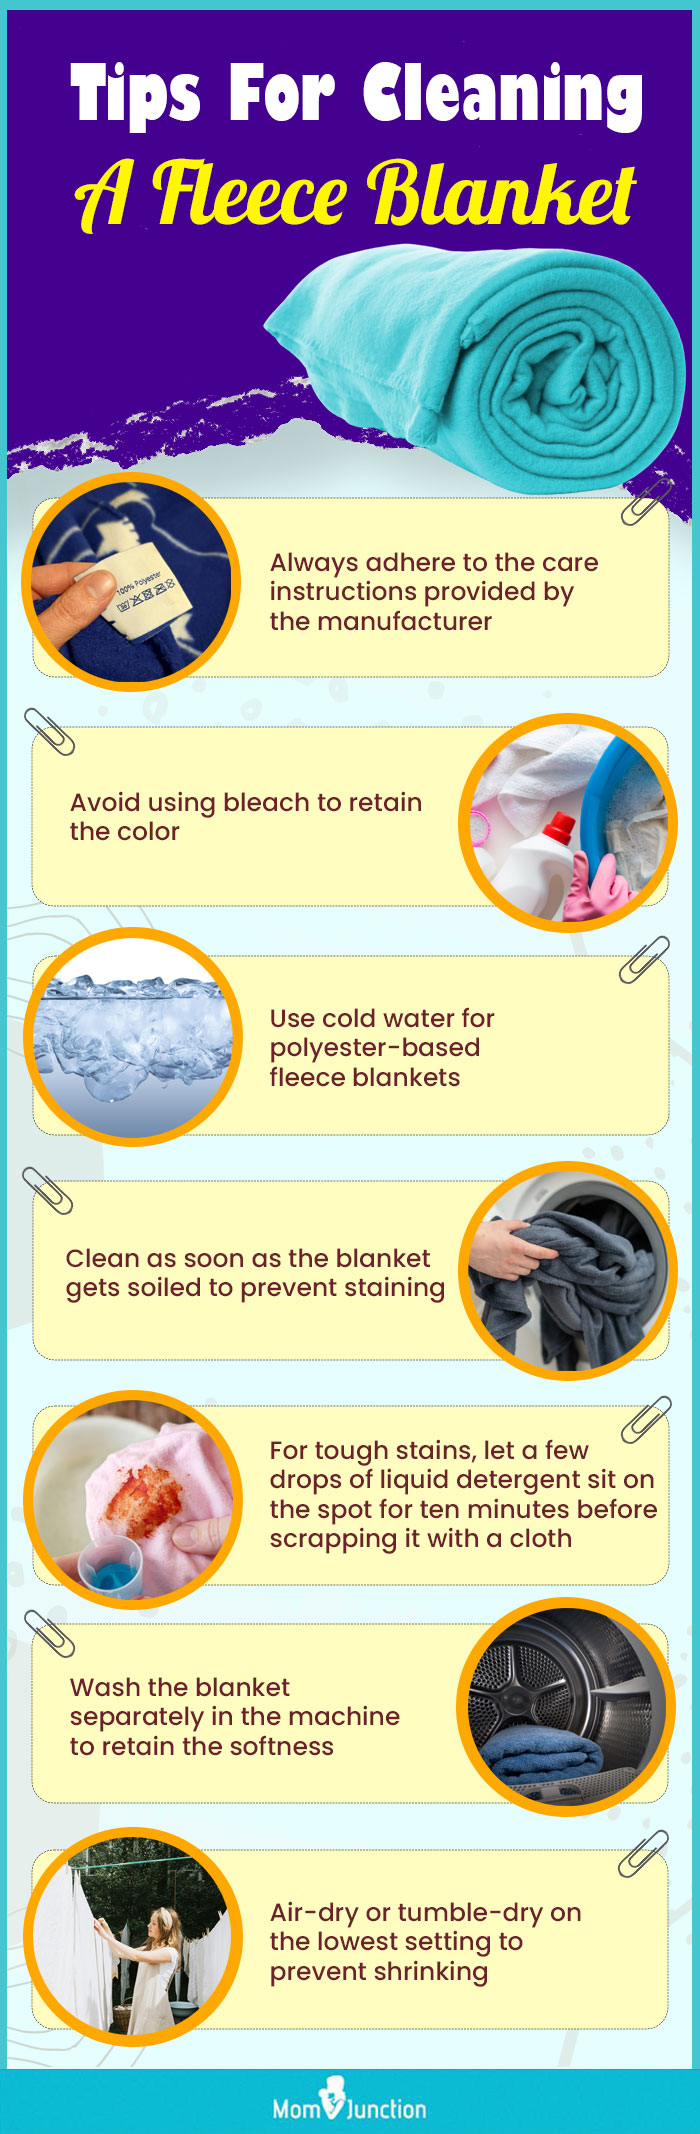 Tips For Cleaning A Fleece Blanket